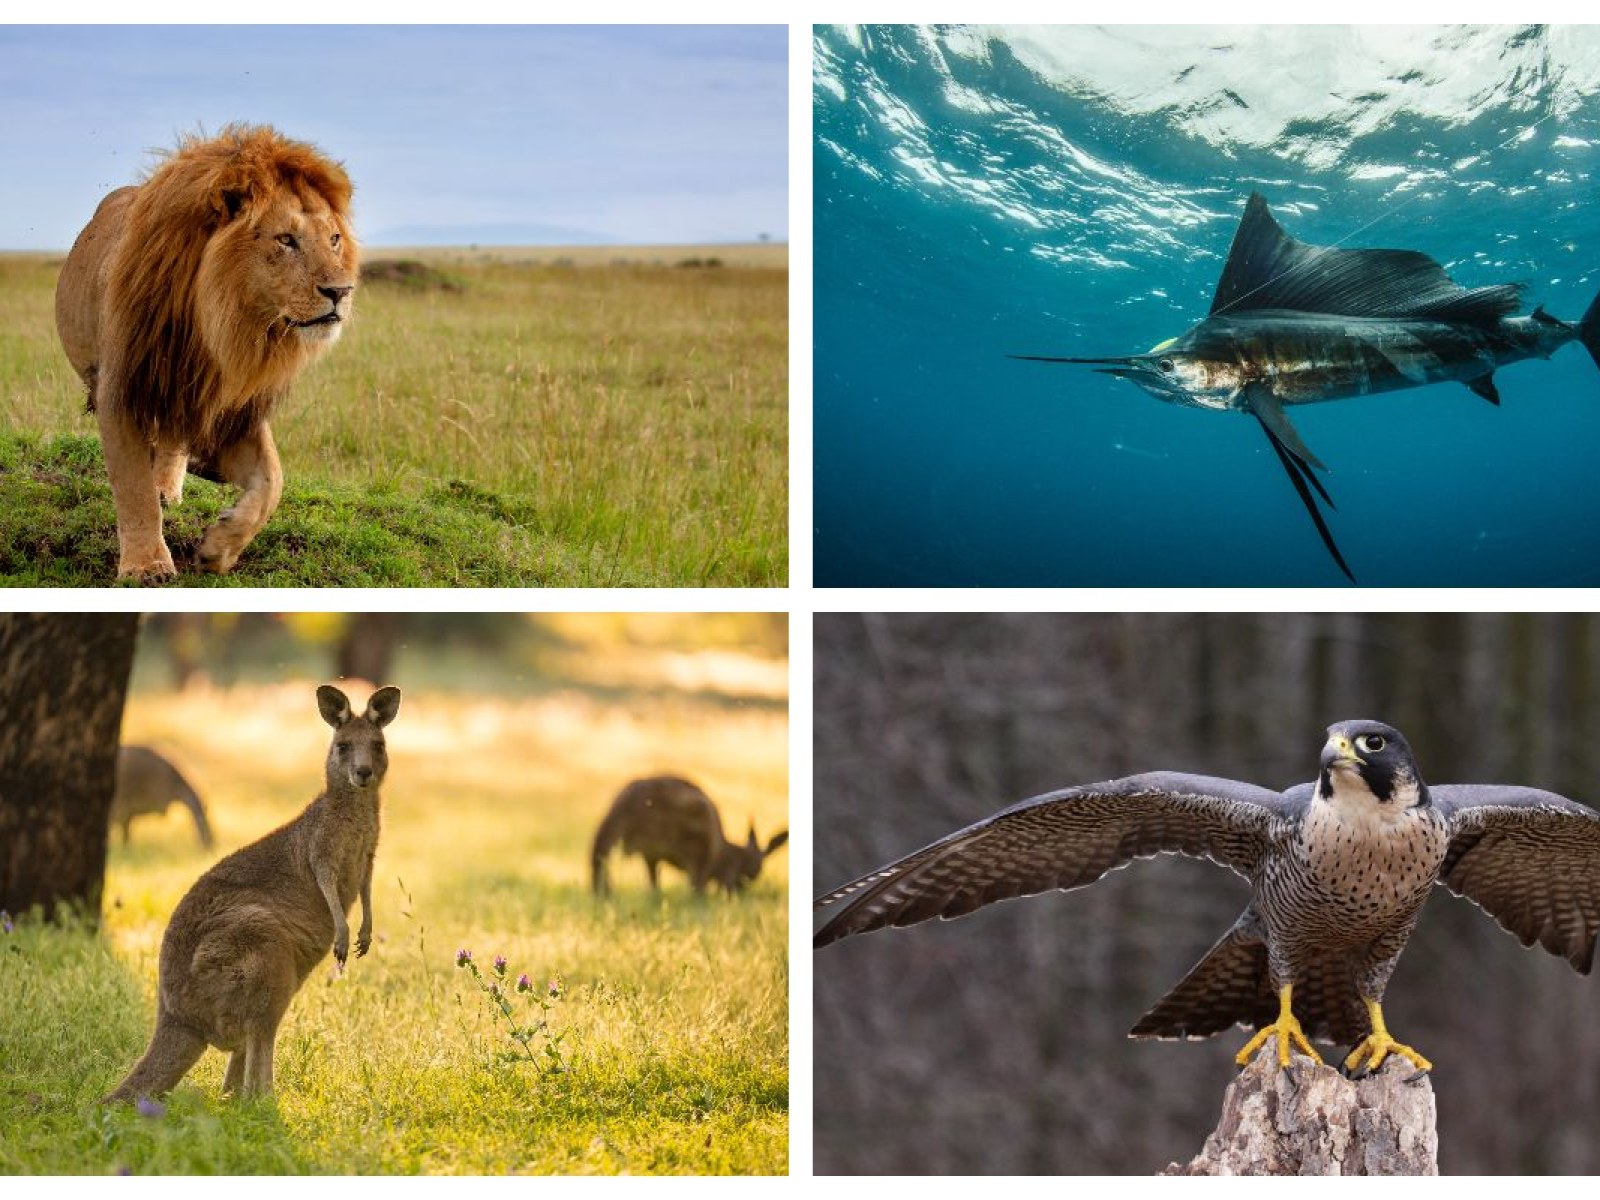 In Pictures: The Fastest Animals on Earth